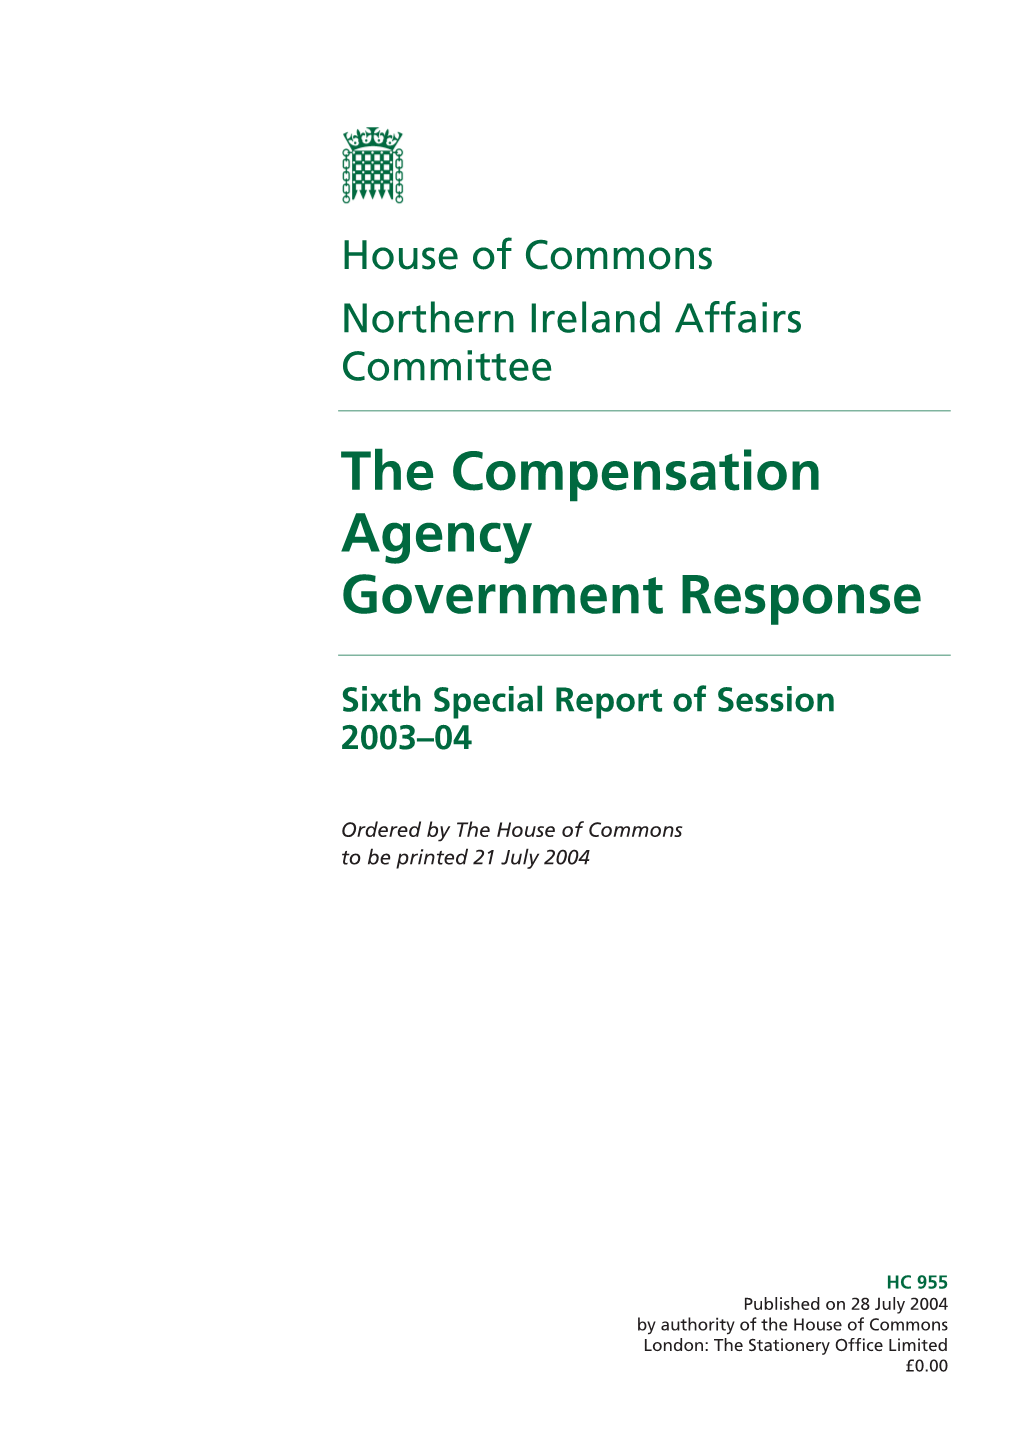 The Compensation Agency Government Response